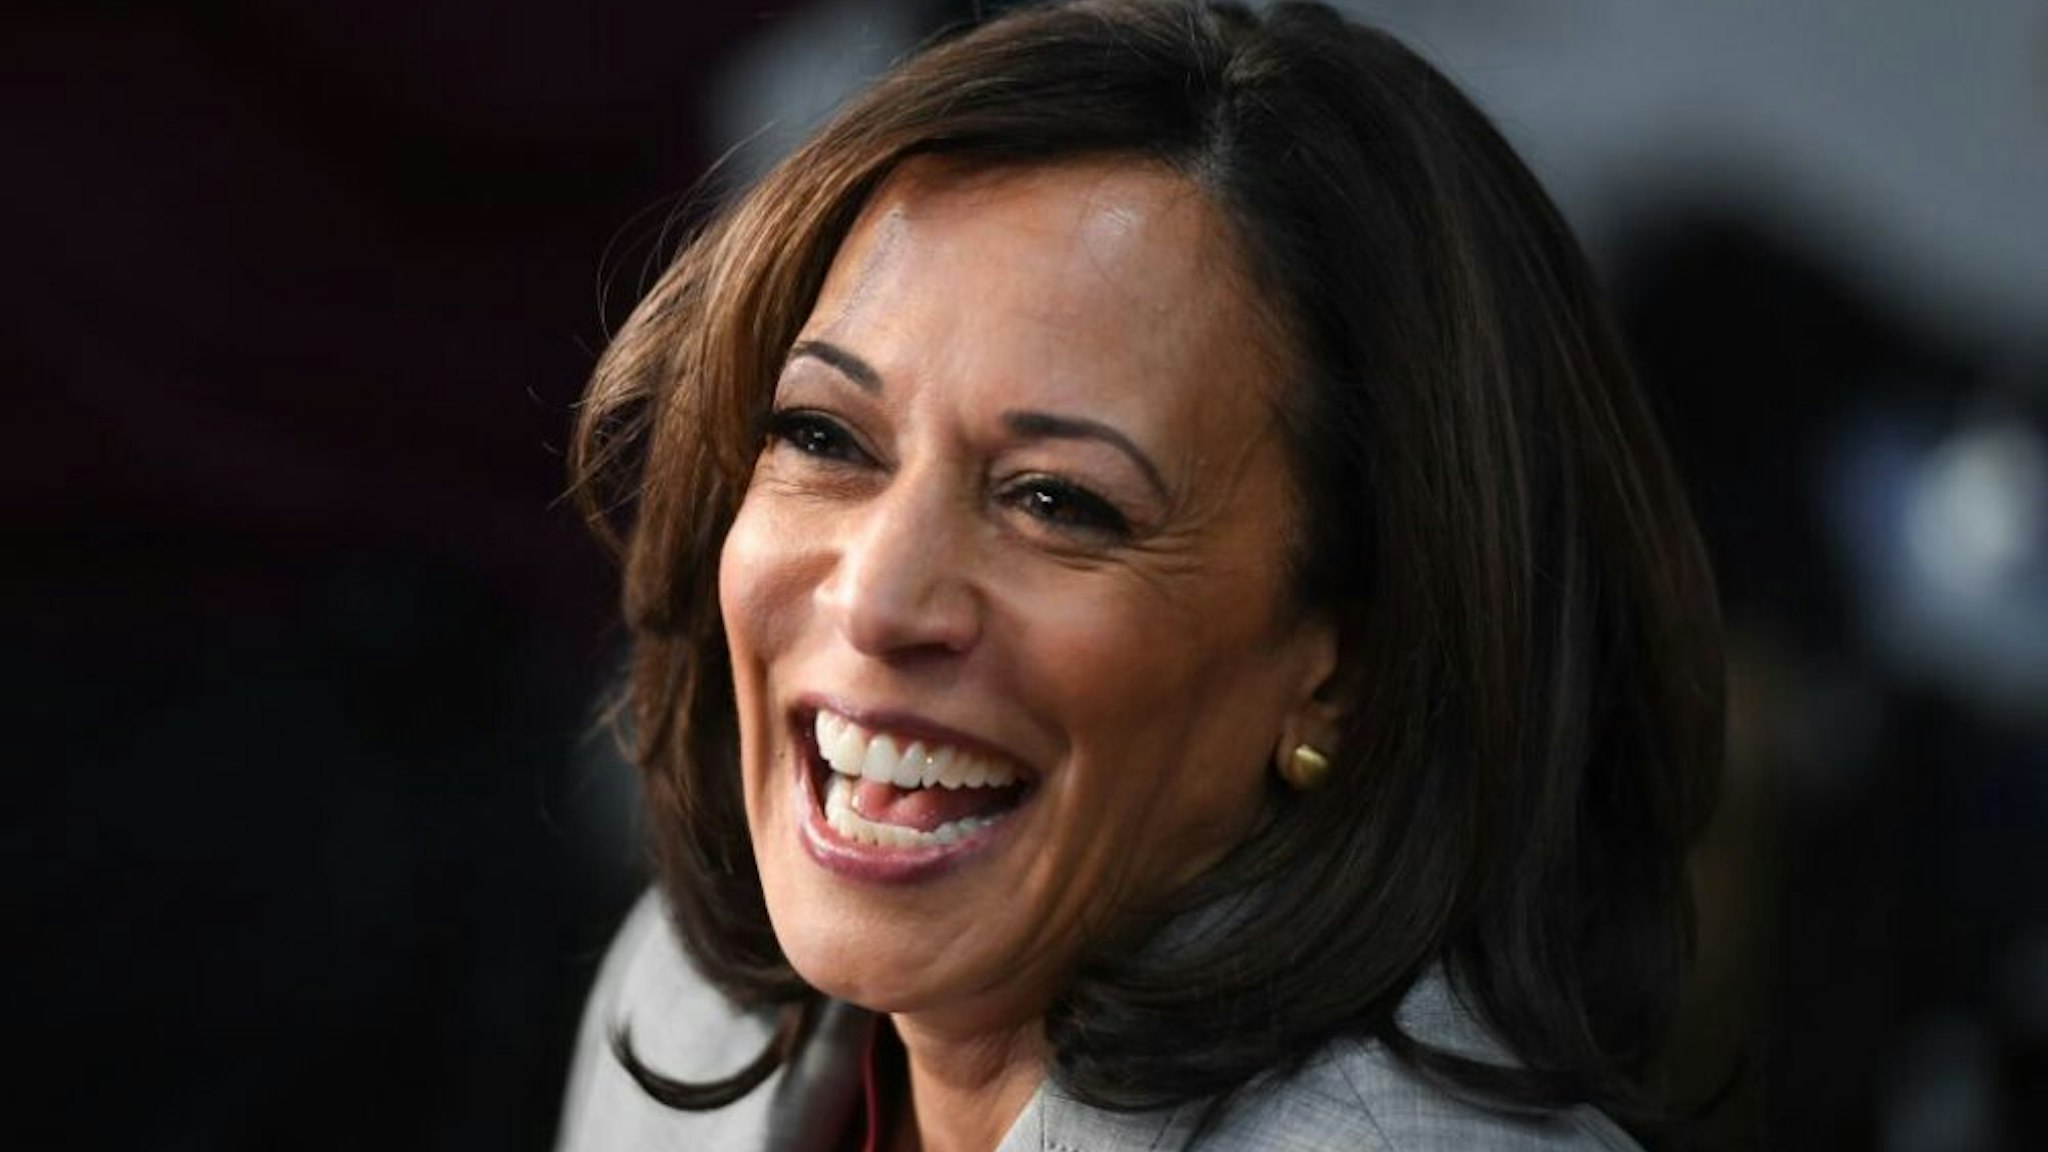 Democratic presidential hopeful California Senator Kamala Harris speaks to the press in the Spin Room after participating in the fifth Democratic primary debate of the 2020 presidential campaign season co-hosted by MSNBC and The Washington Post at Tyler Perry Studios in Atlanta, Georgia. - Democratic presidential nominee Joe Biden named Harris, a high-profile black senator from California, as his vice presidential choice on August 11, 2020, capping a months-long search for a Democratic partner to challenge President Donald Trump in November.